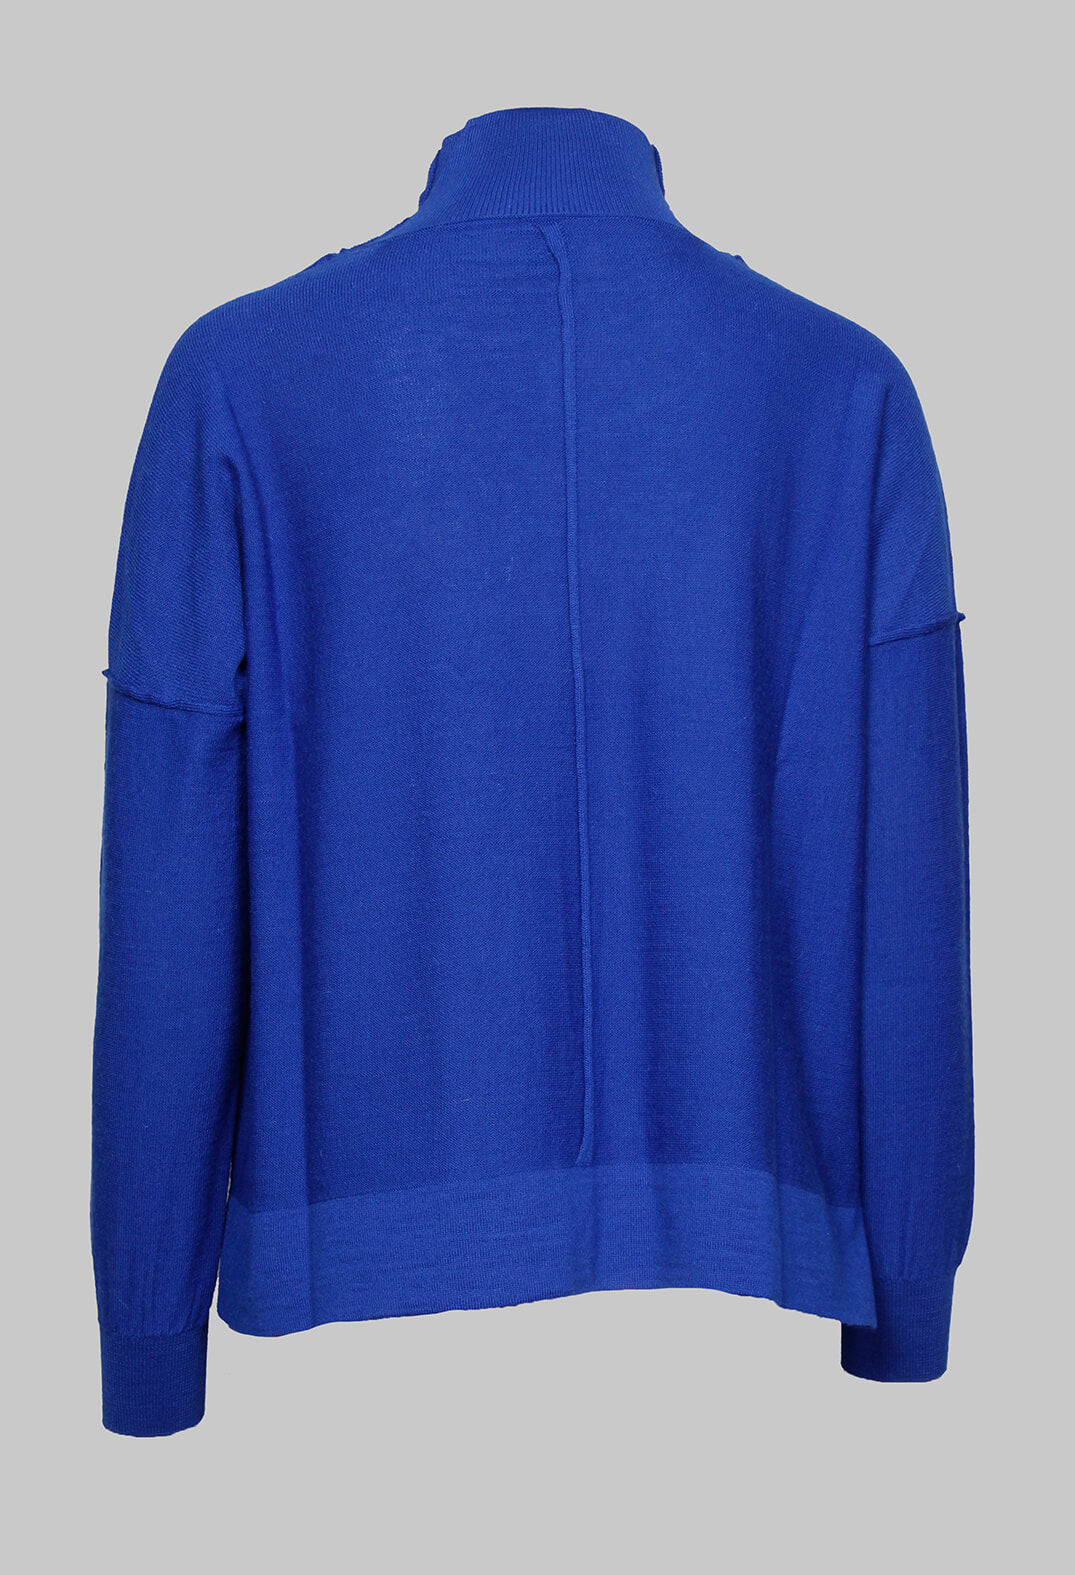 High Neck Sweater with Seam Detail in Royal Blue